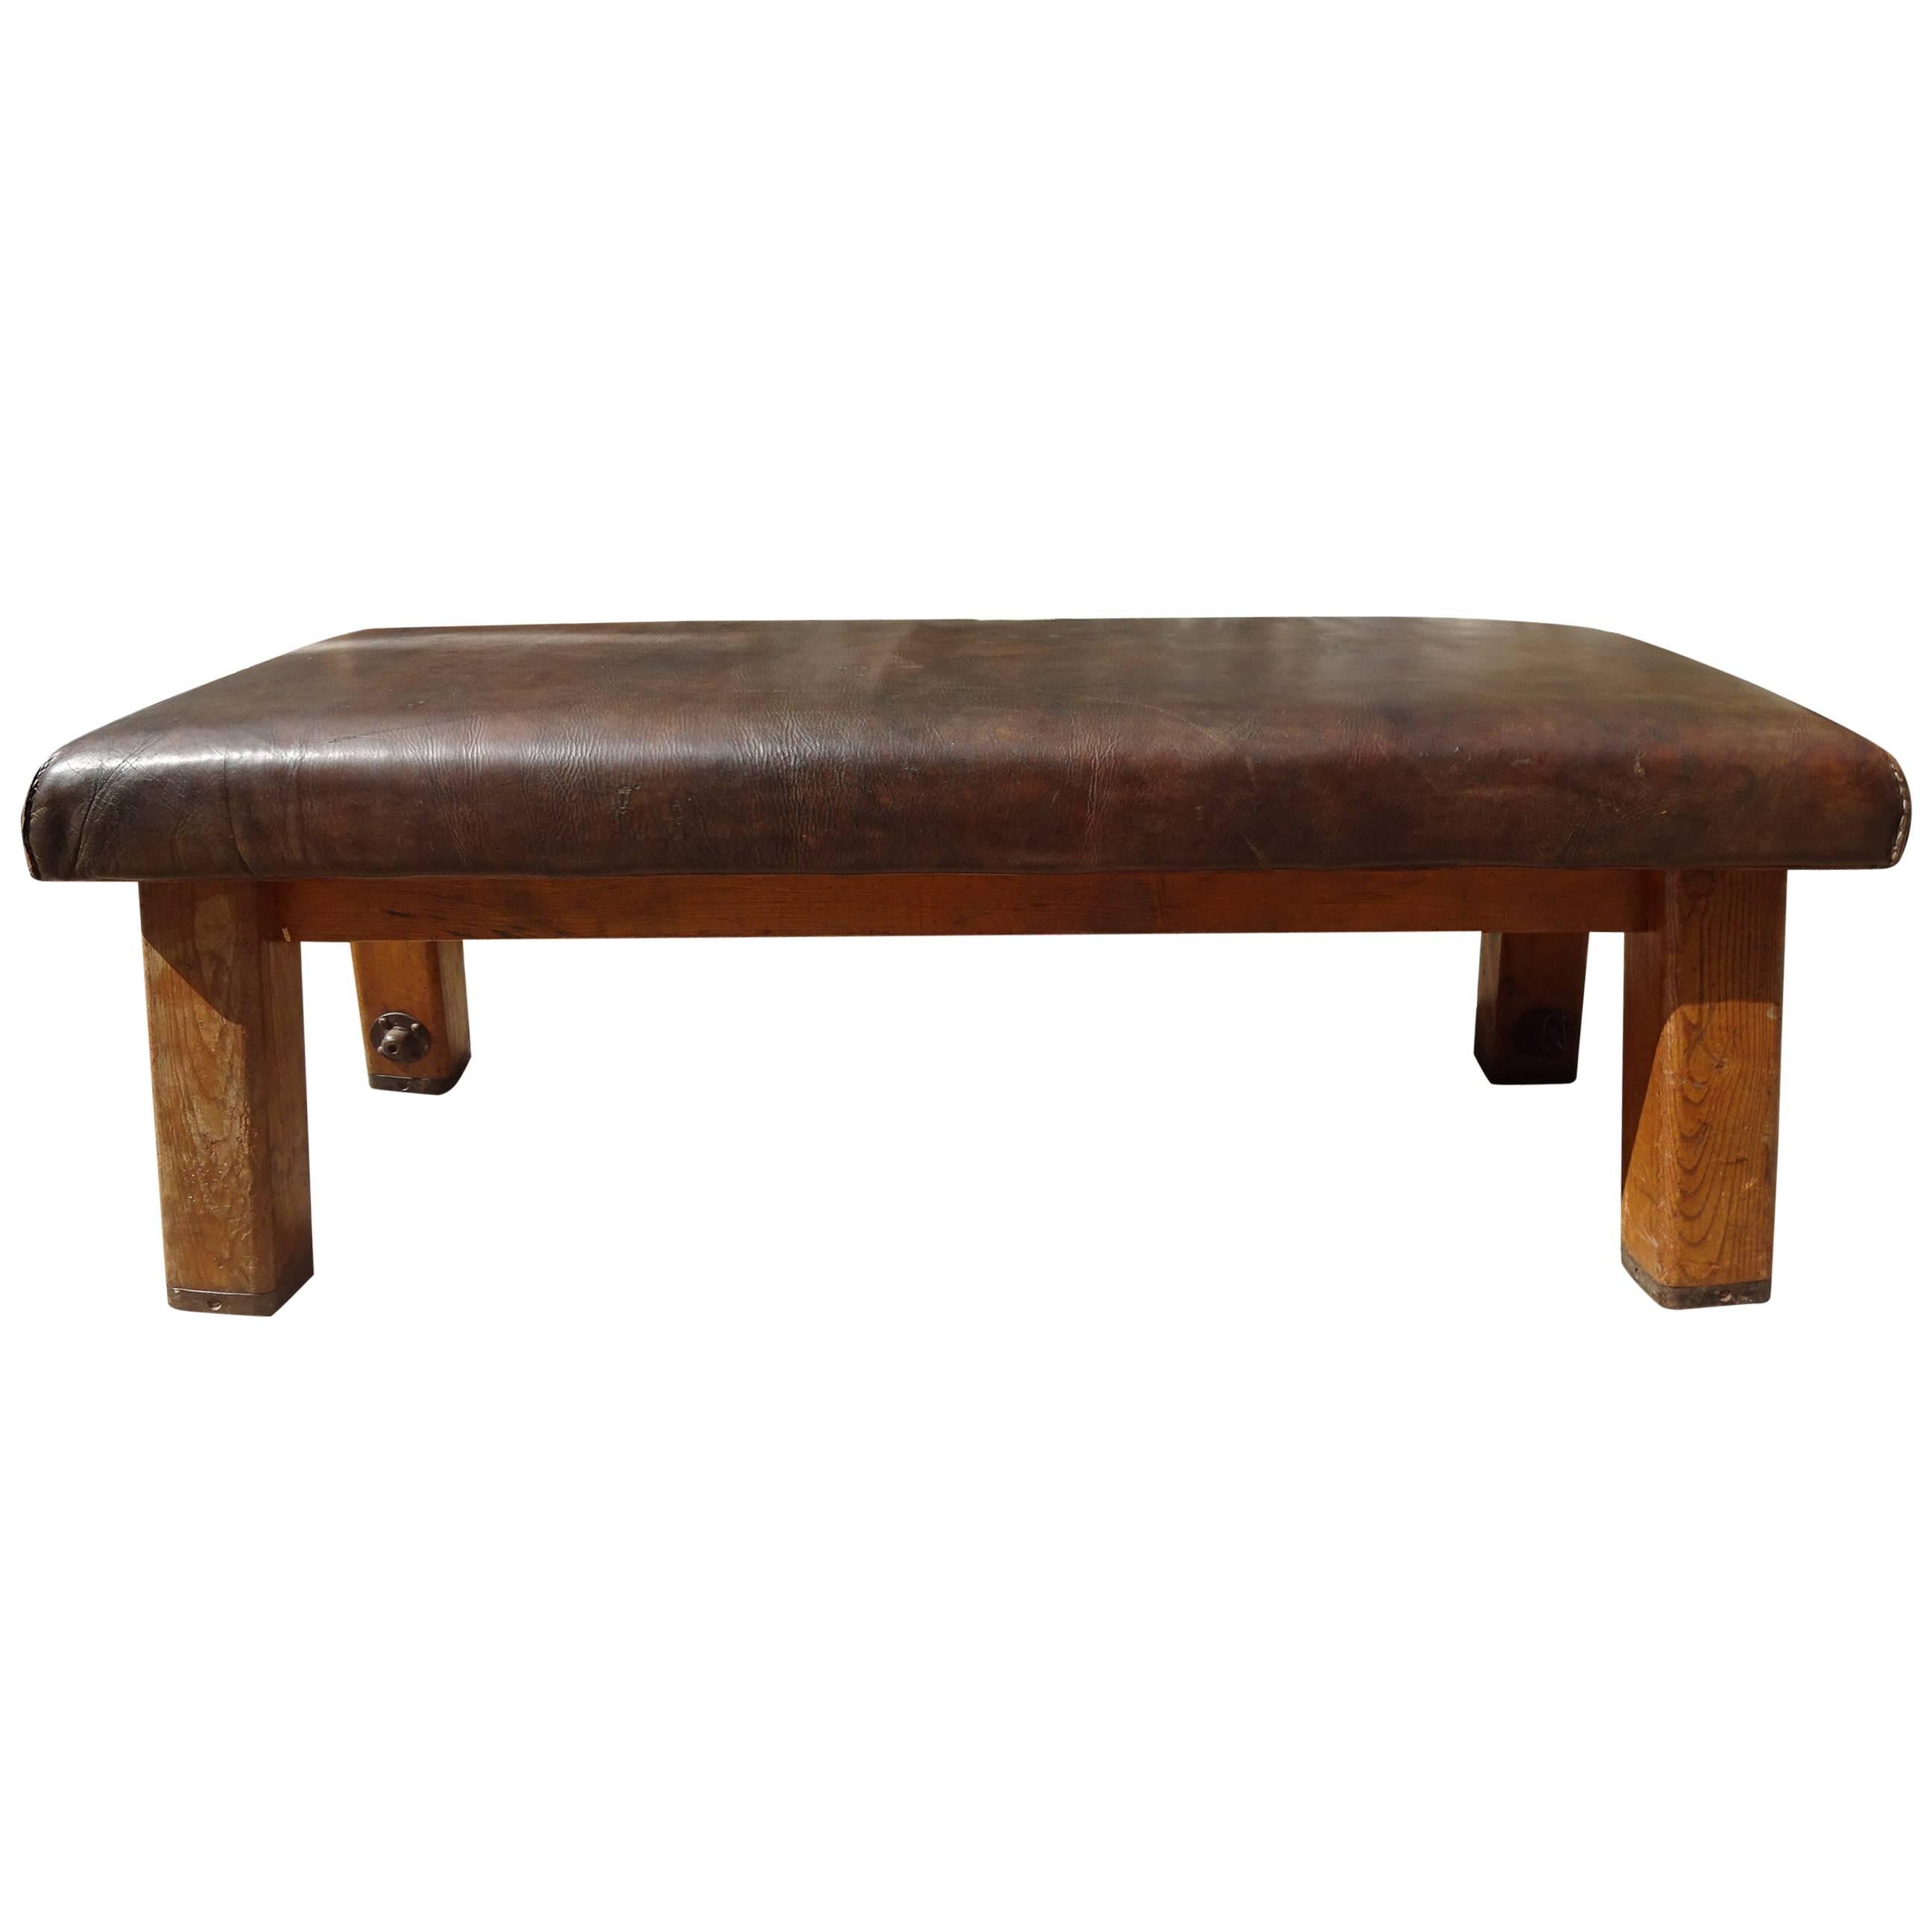 Early 20th Century Gymnastic Leather Bench